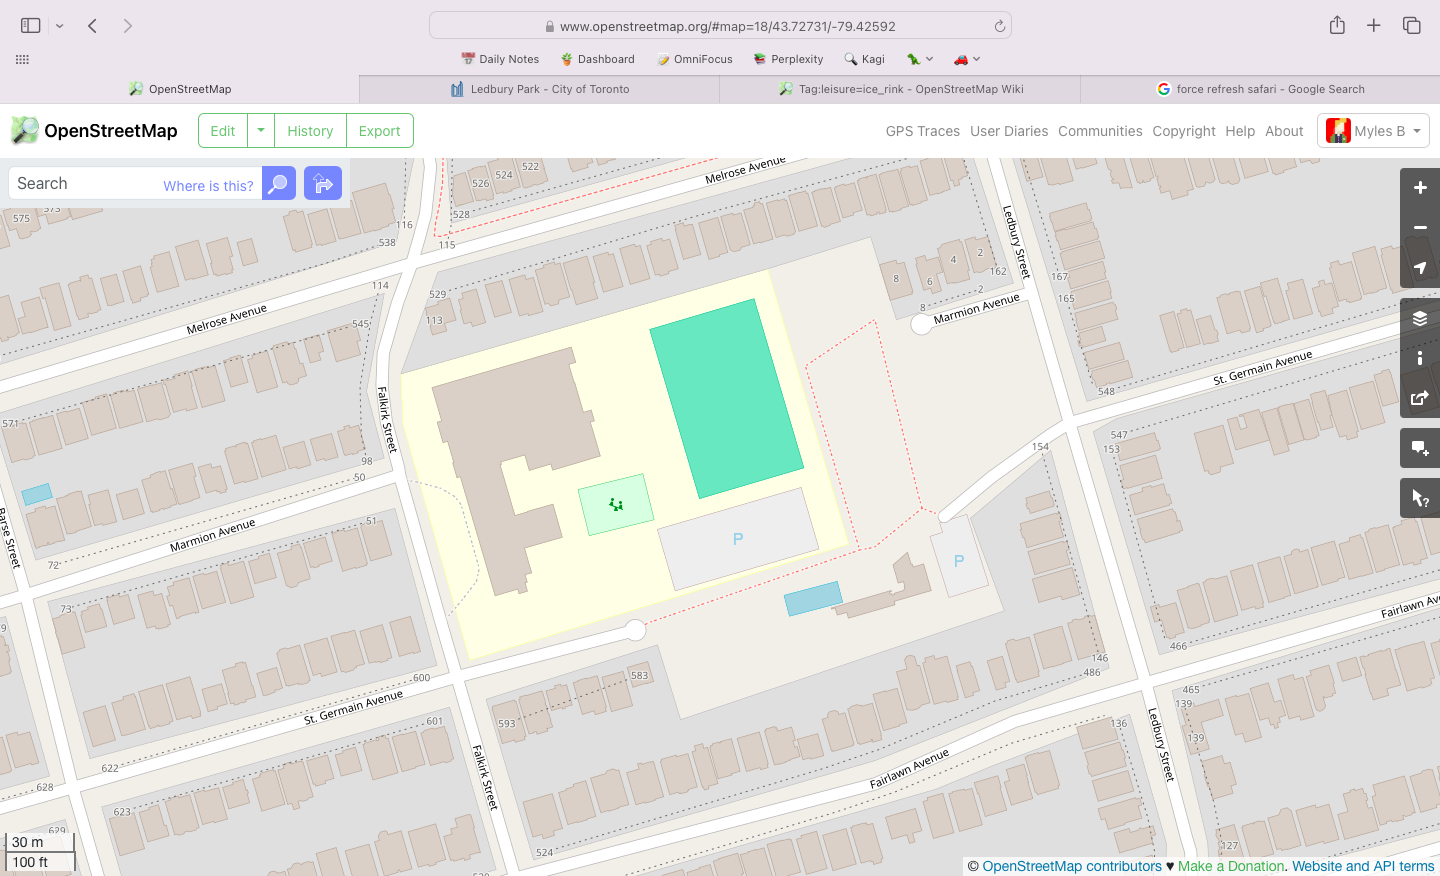 An OpenStreetMaps view of Ledbury Park before I made some edits.